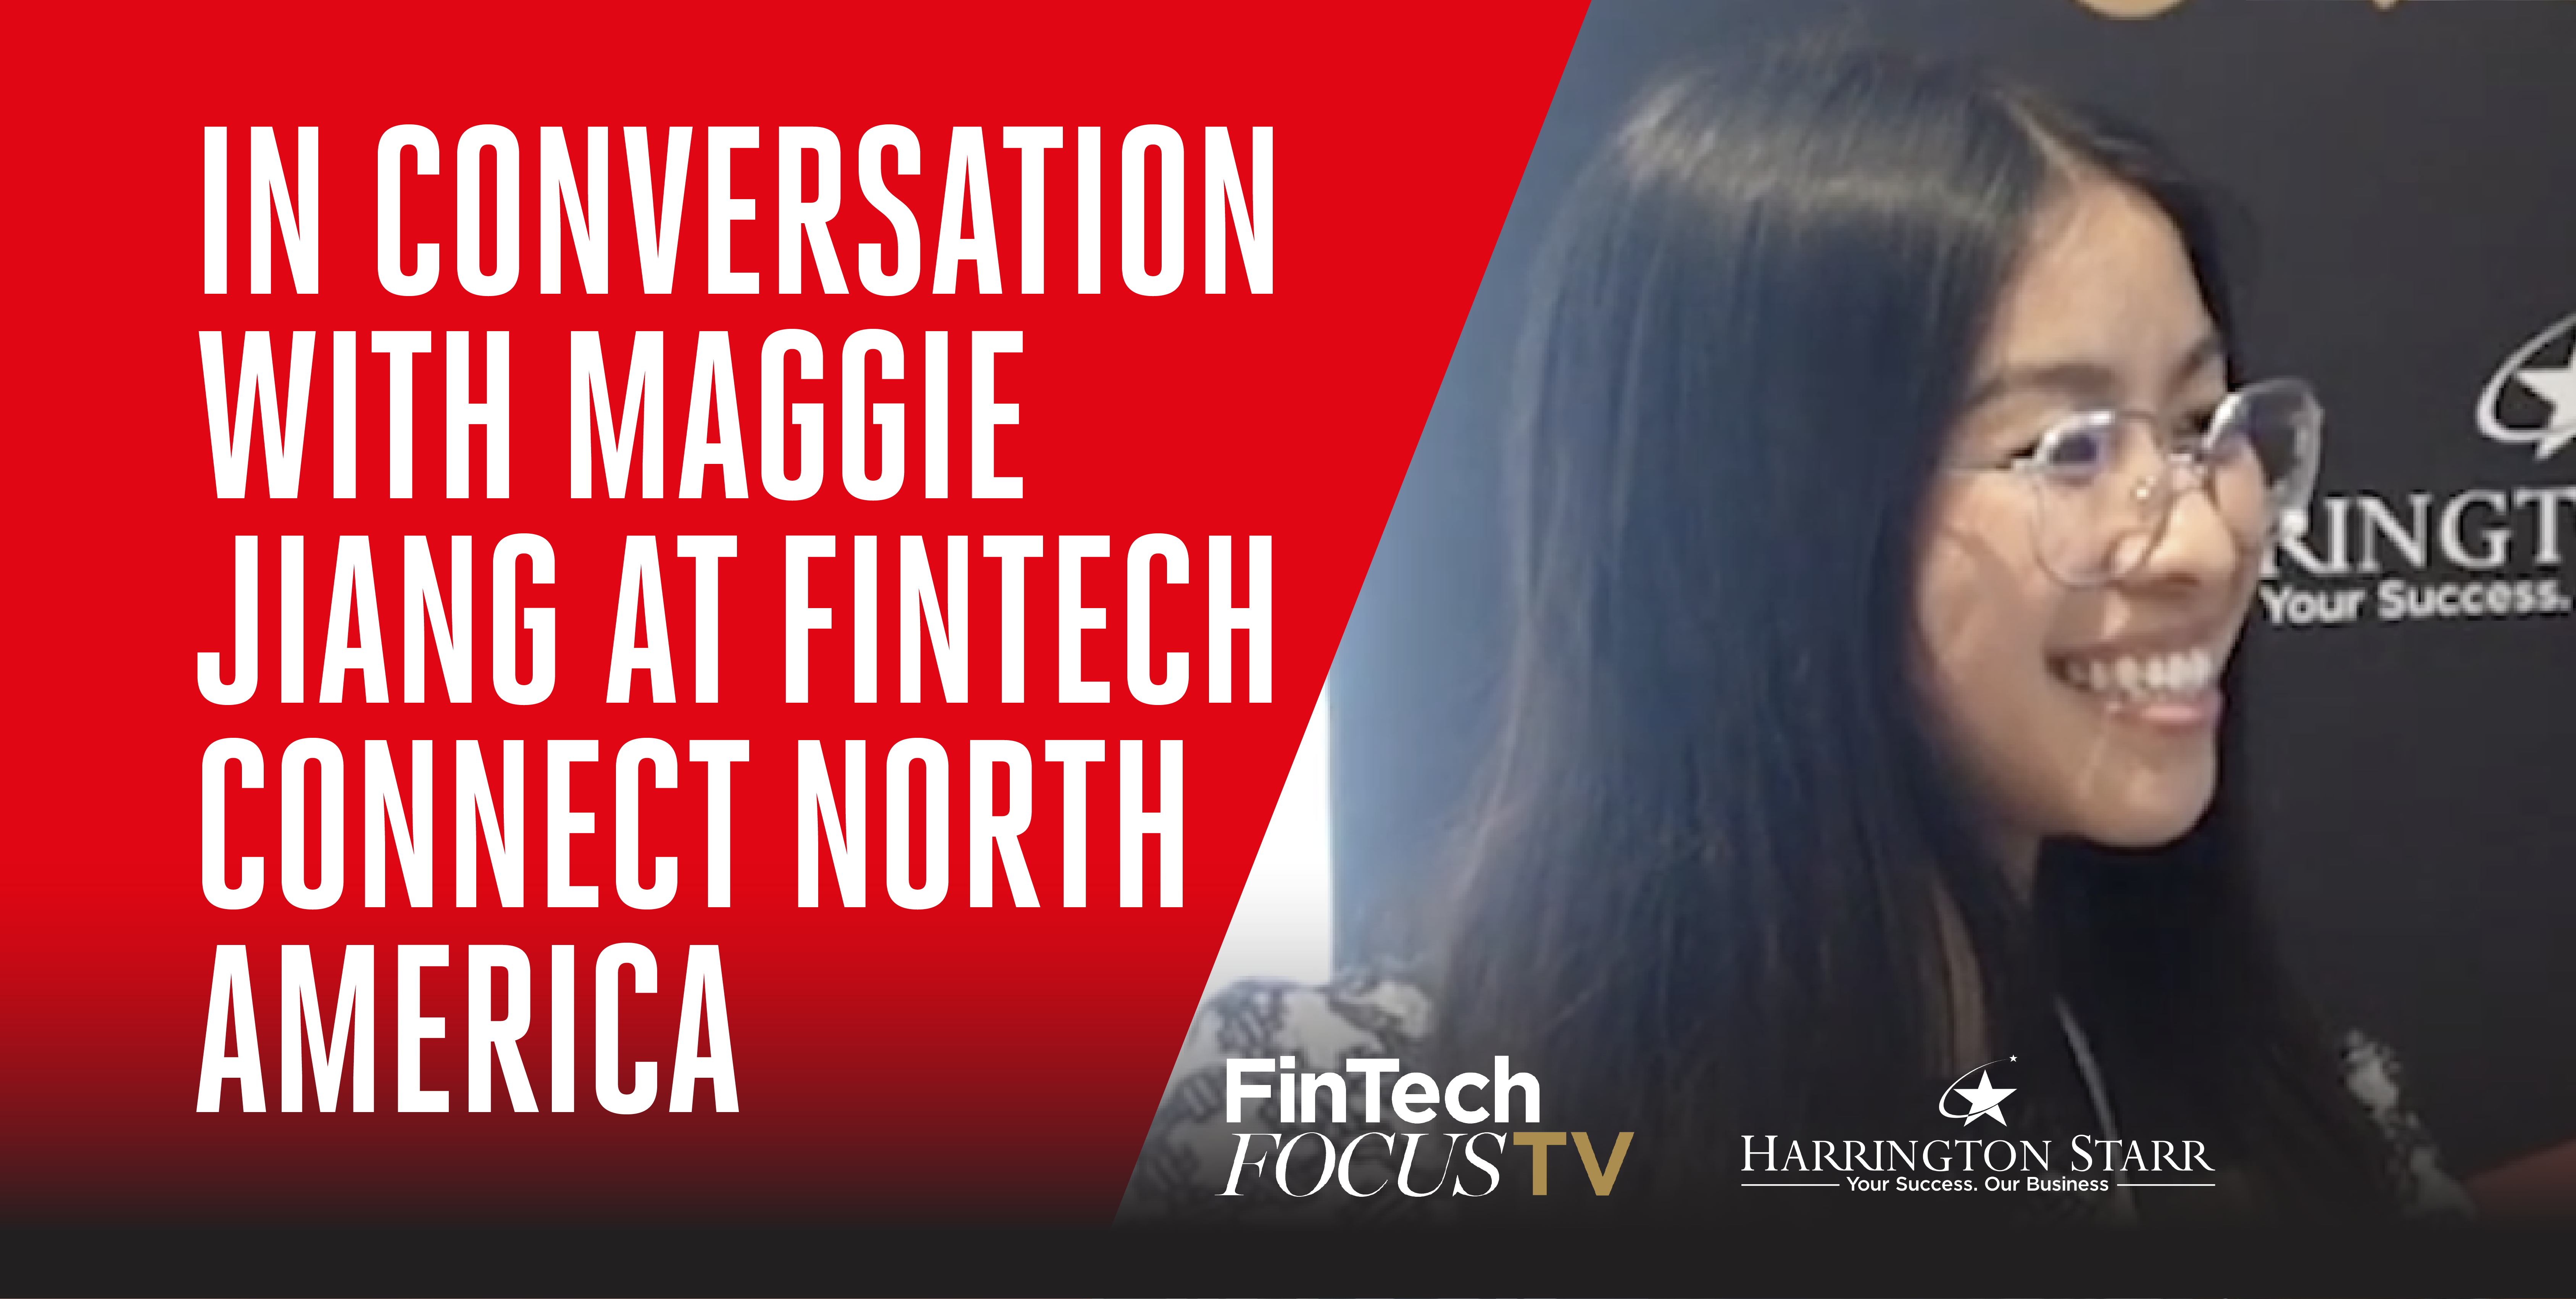 In Conversation with Maggie Jiang at Fintech Connect North America